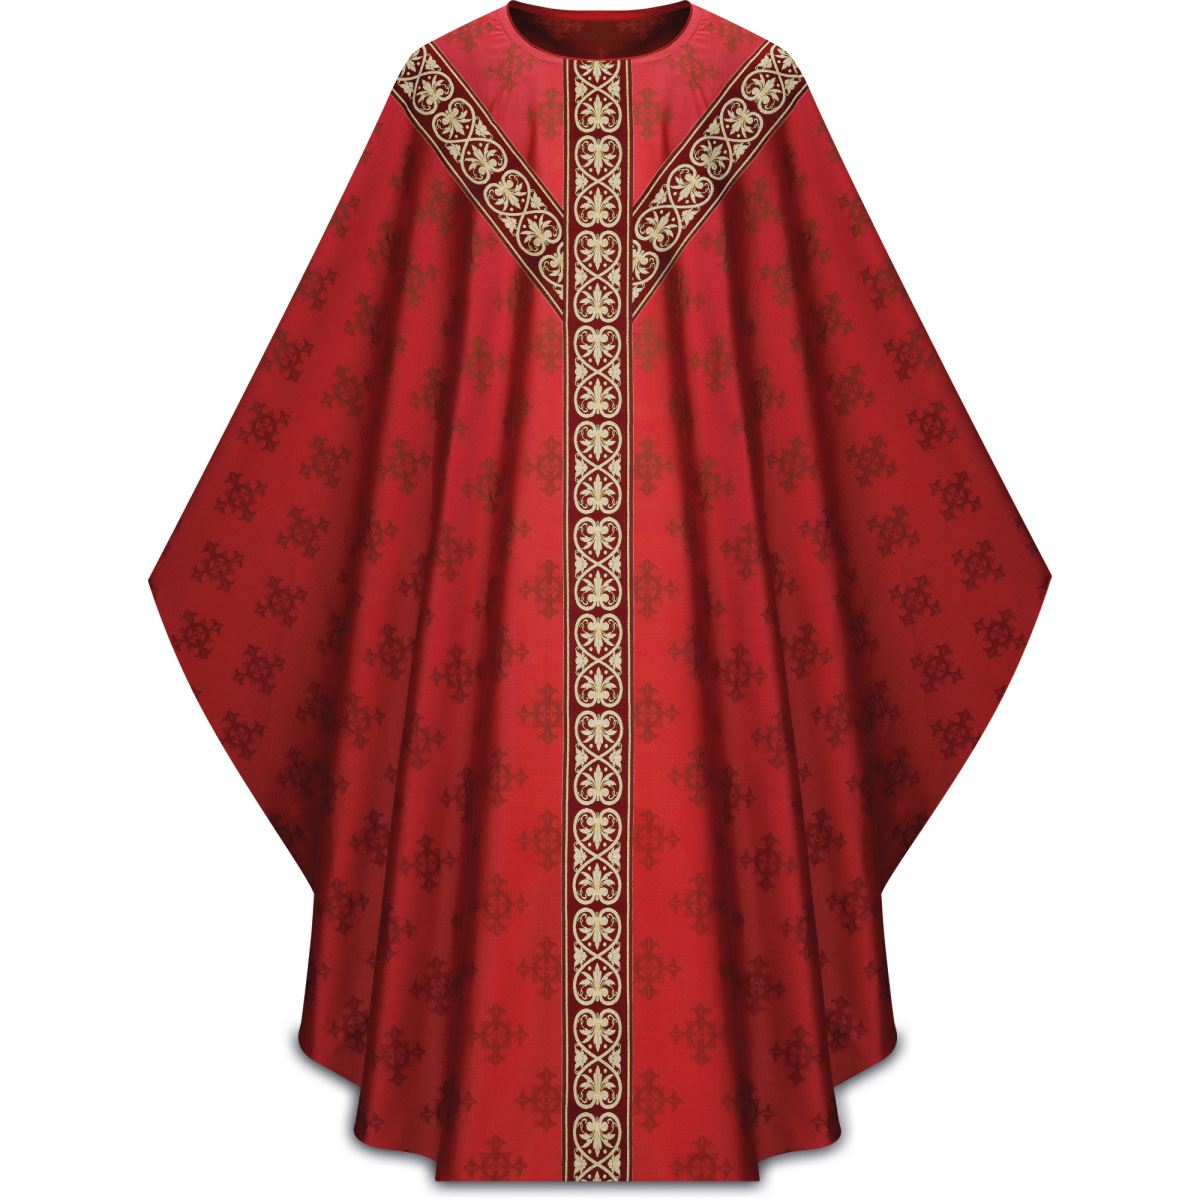 Gothic Chasuble in Red Adornes Fabric with Plain Collar